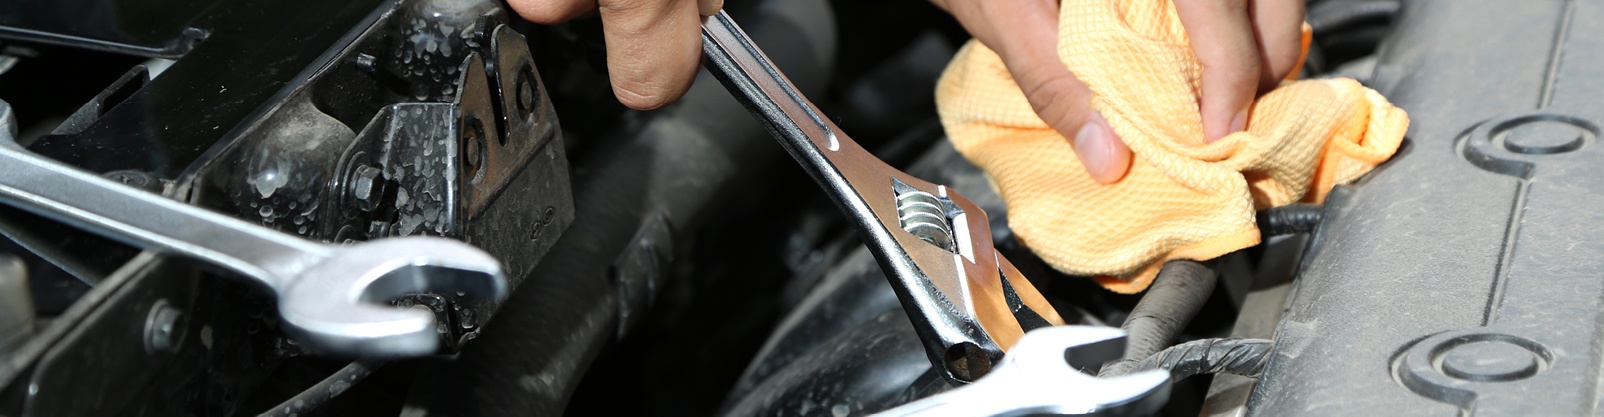 10 Vehicle Maintenance Recommendations That Actually Work